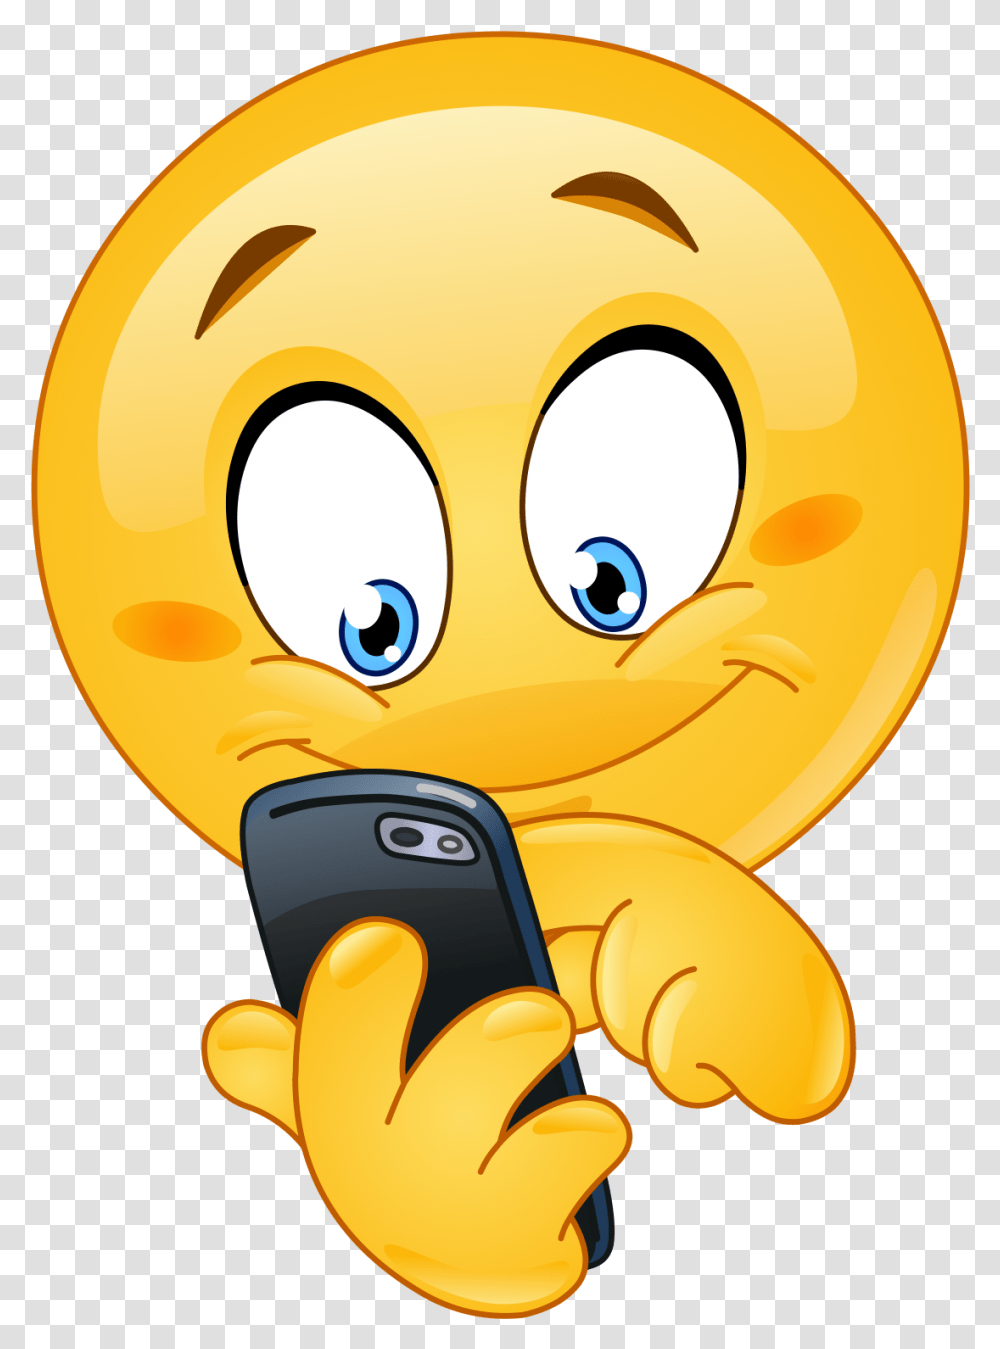 Cell Phone Emoji Decal Emoji Using Phone, Electronics, Mobile Phone, Texting, Hand-Held Computer Transparent Png